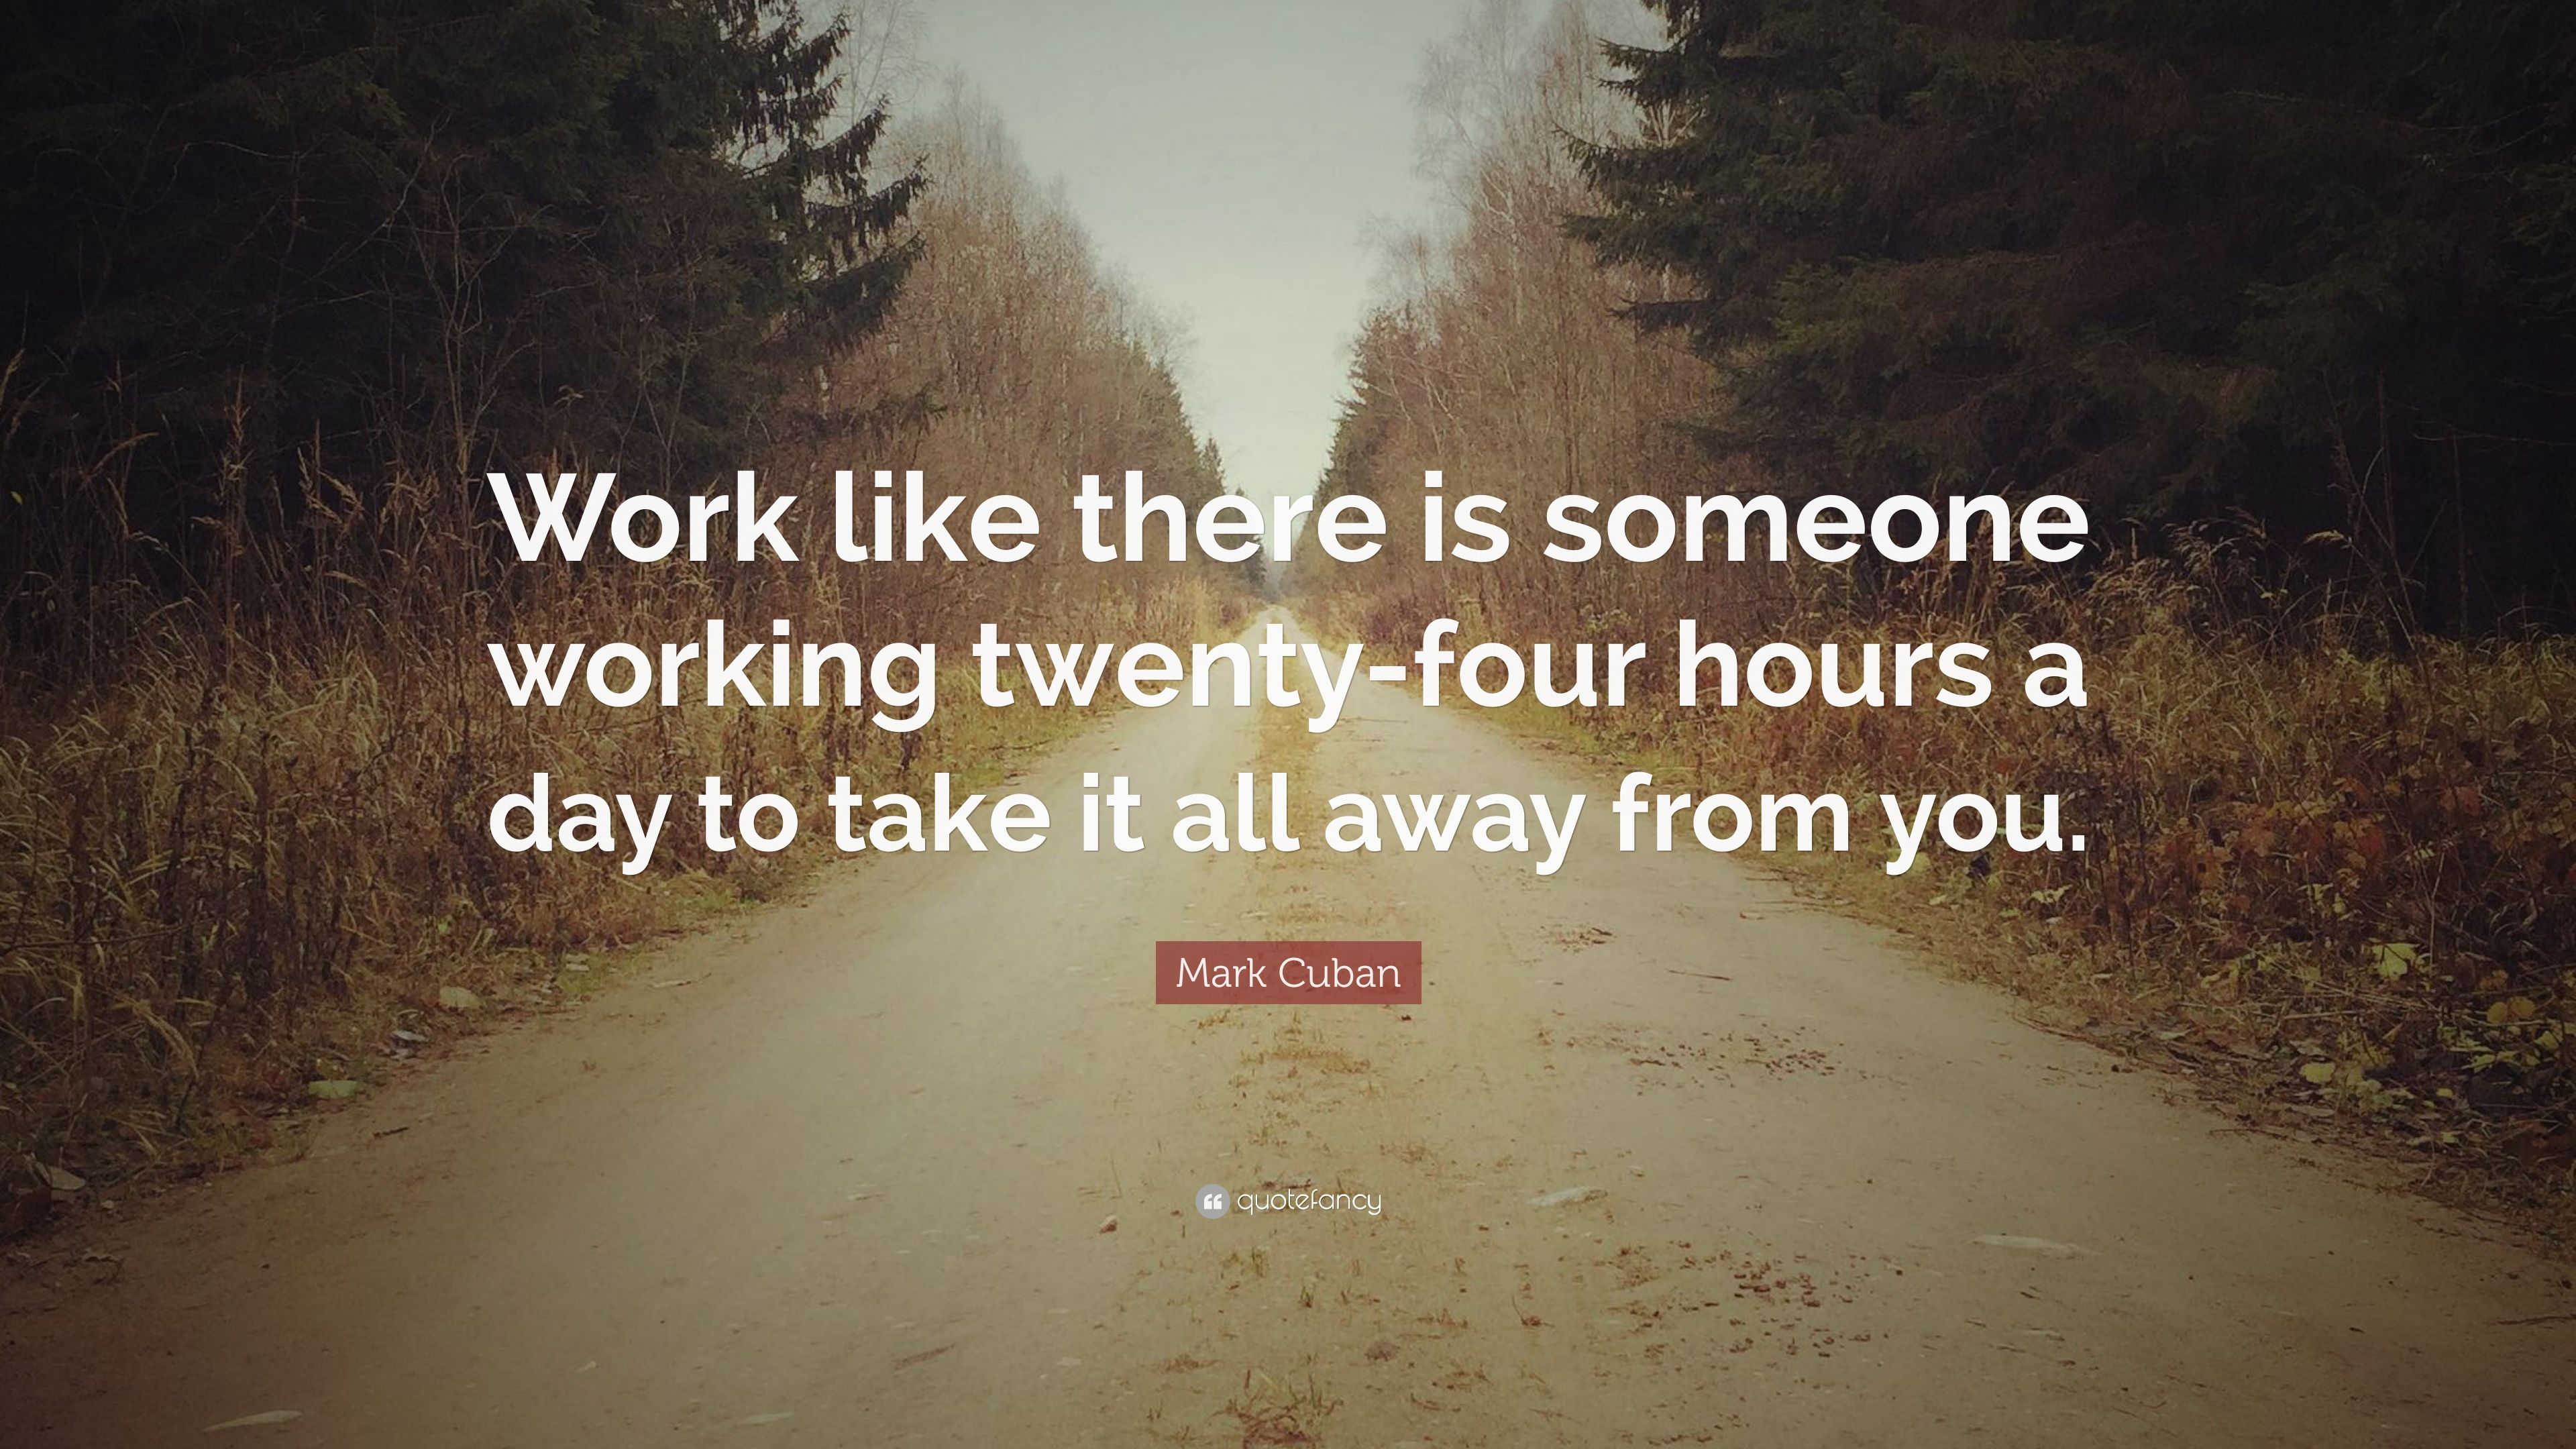 Work quotes worklike there Crazy quotes 40 wallpaper quotefancy